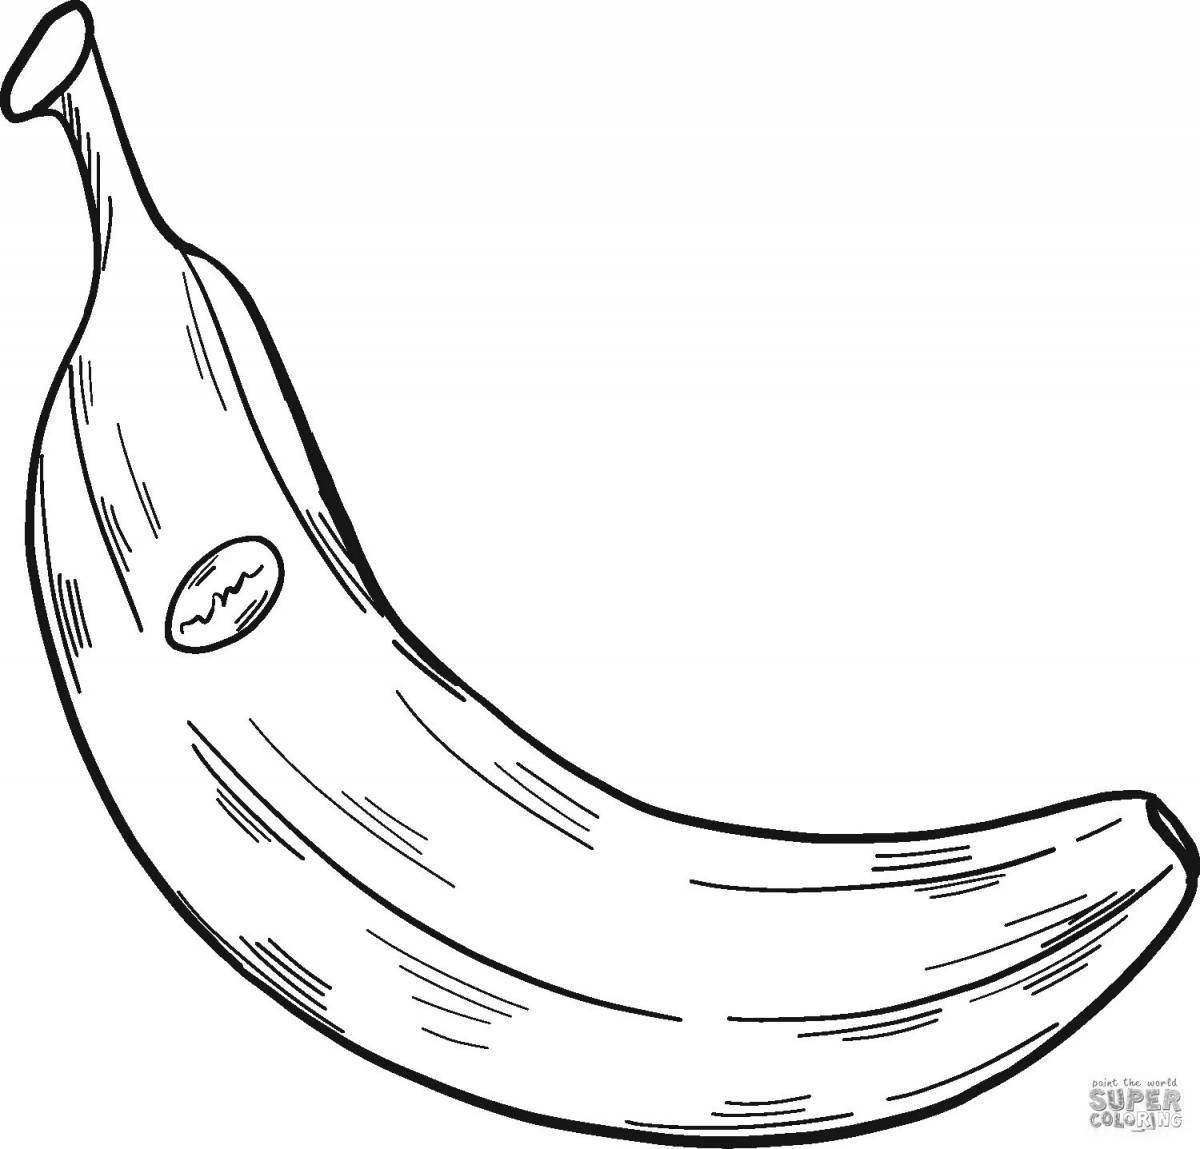 Entertaining banana coloring book for 3-4 year olds